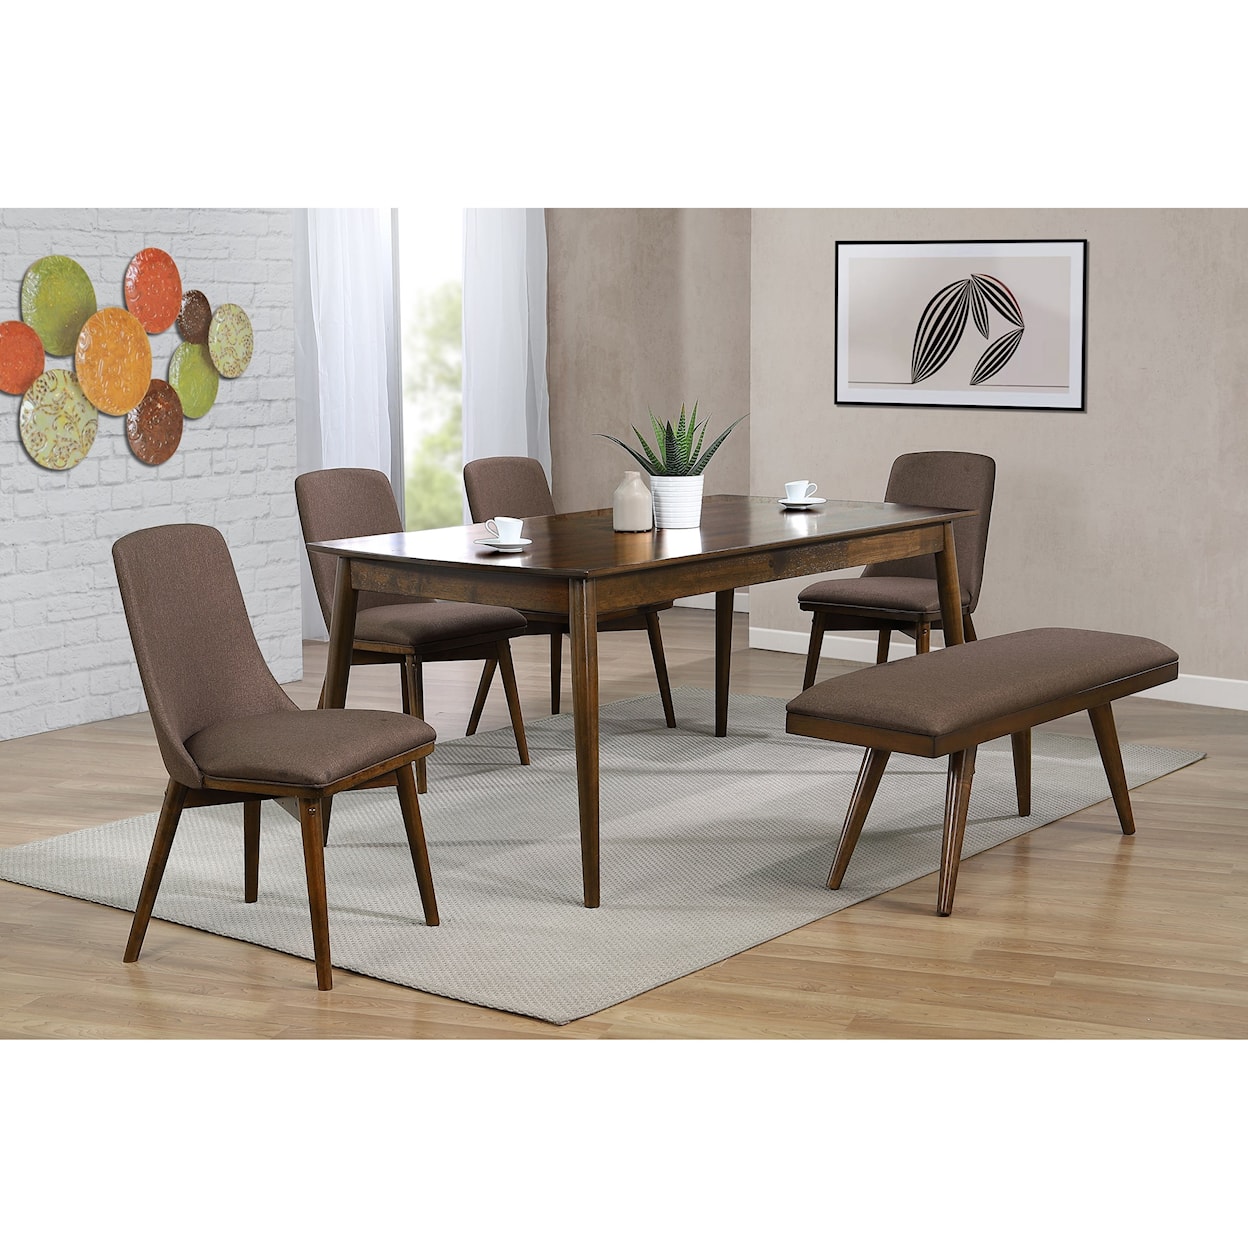 Winners Only Santana Upholstered Dining Side Chair